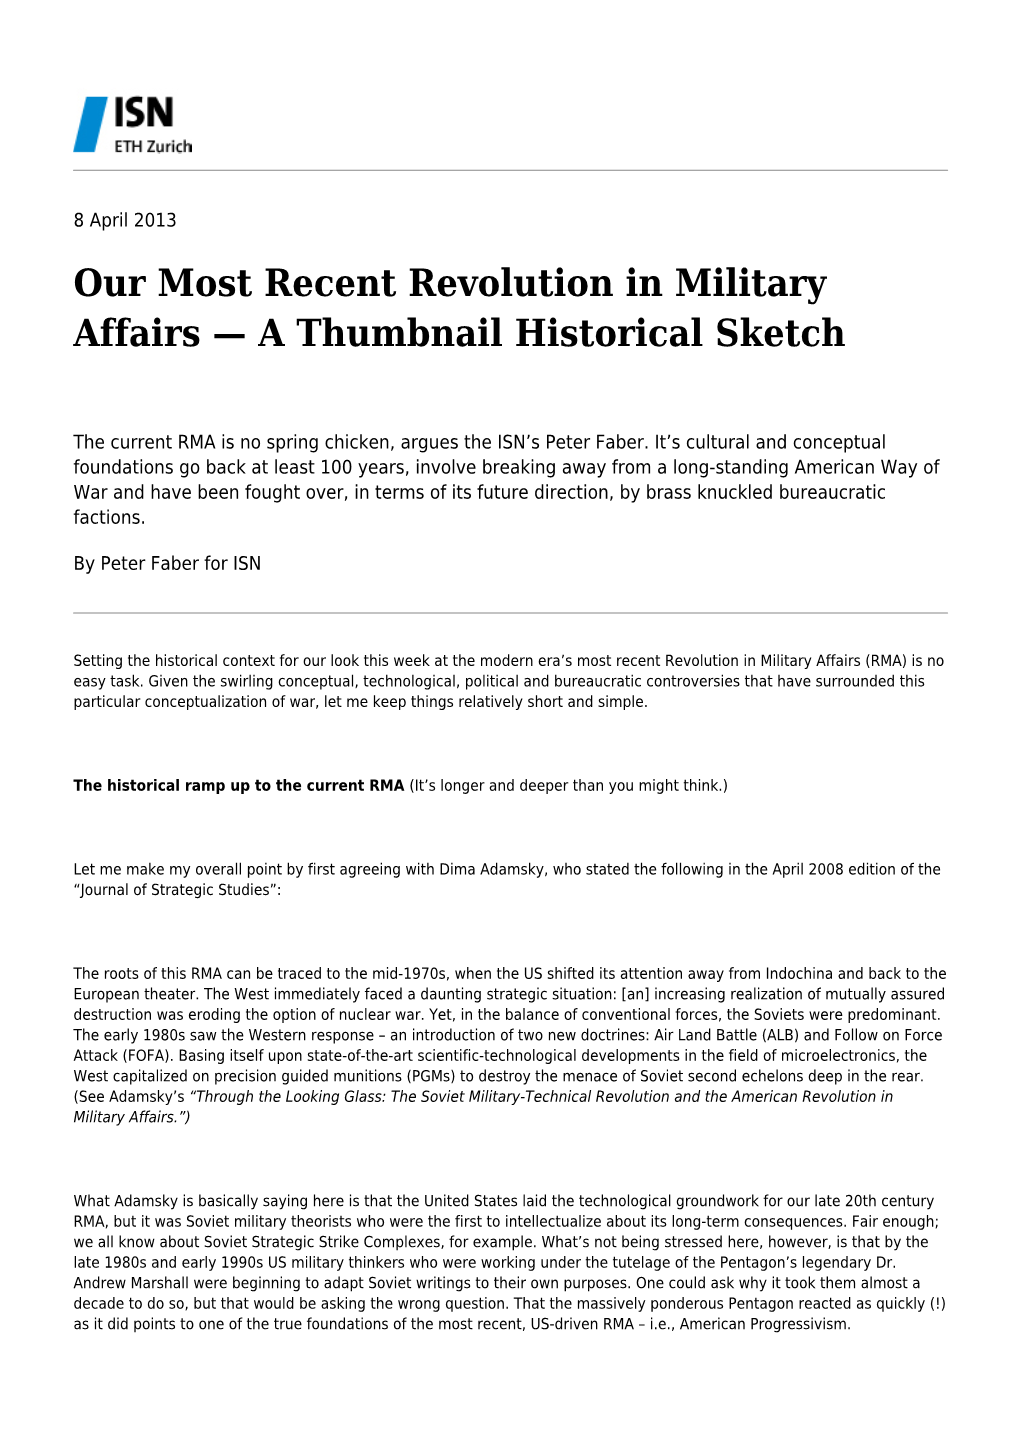 Our Most Recent Revolution in Military Affairs — a Thumbnail Historical Sketch